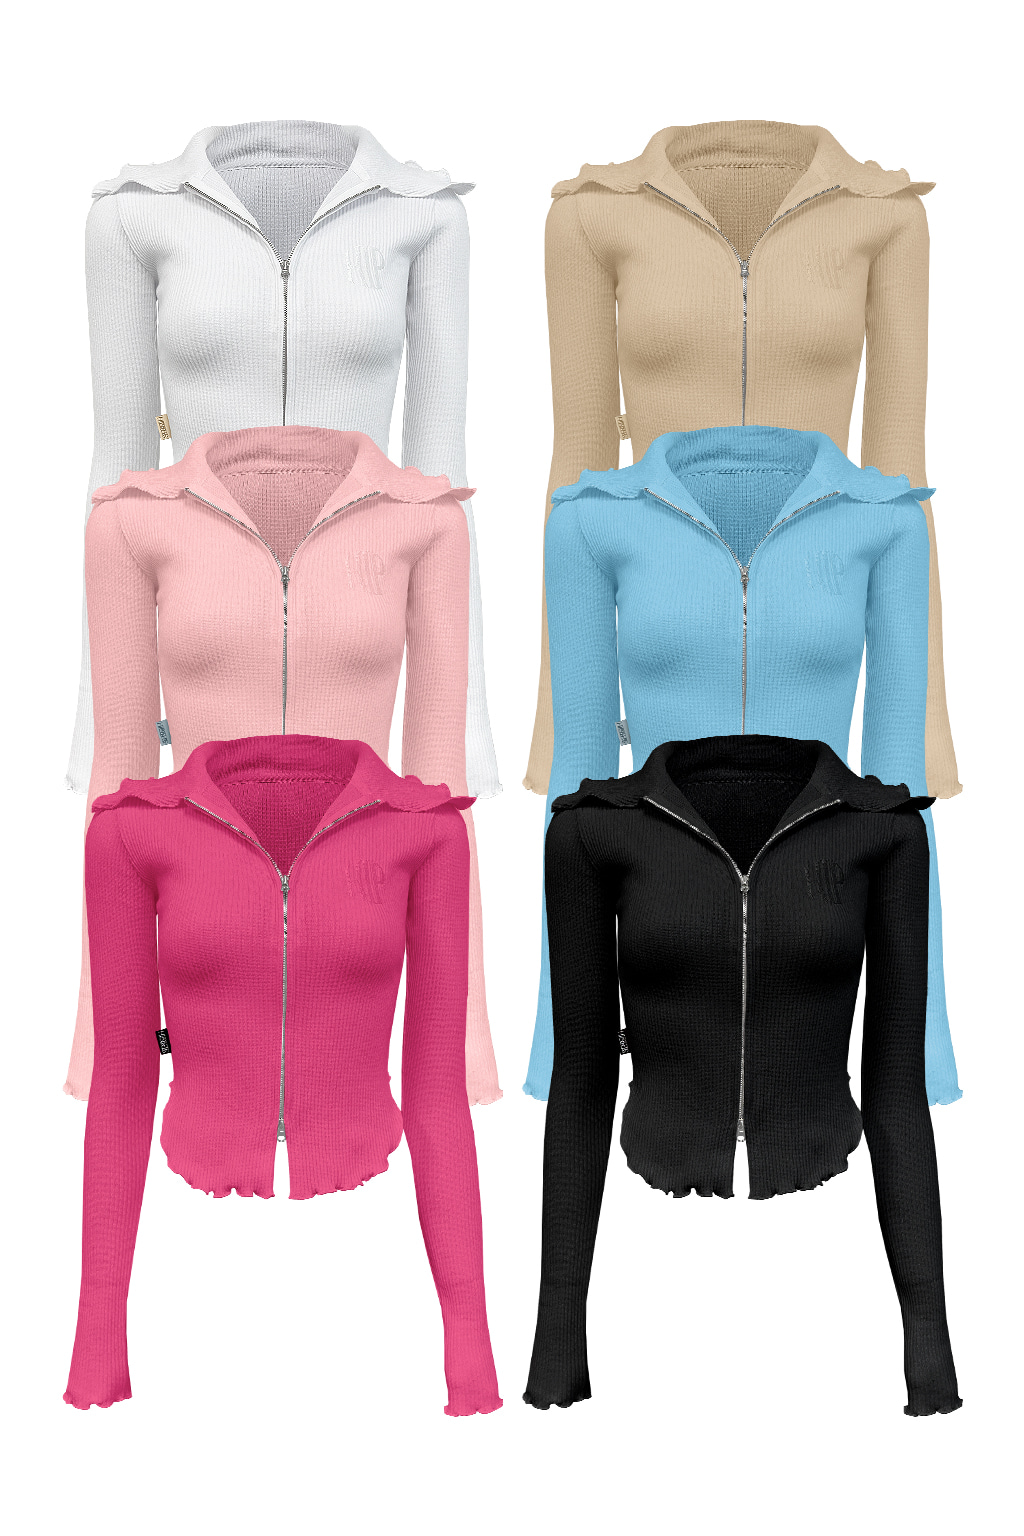 Golgi Tension Two Way Glamour Zip Up - 6 colors